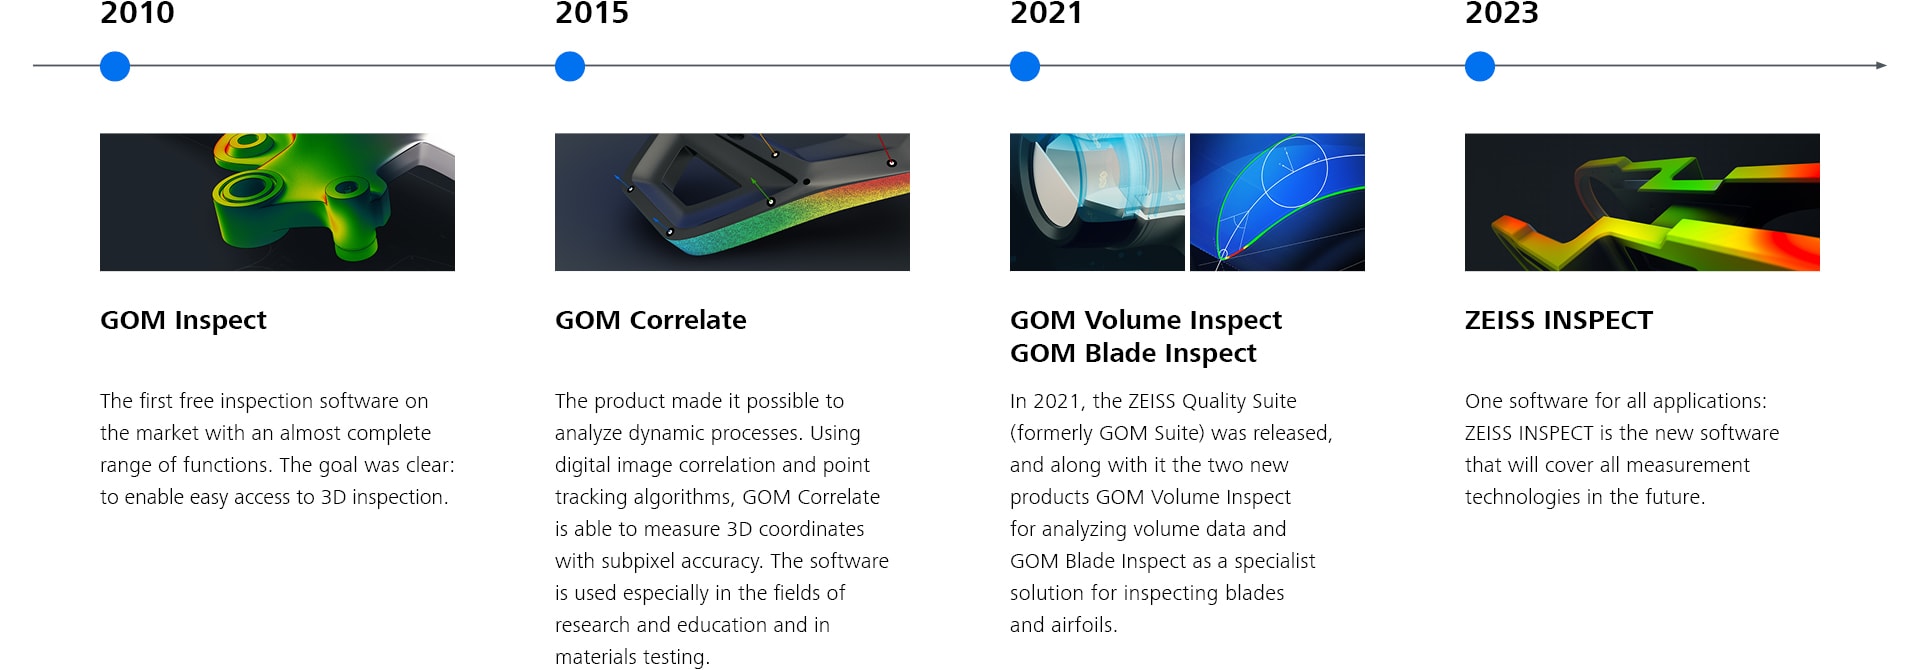 Timeline showing the history from GOM software to ZEISS INSPECT